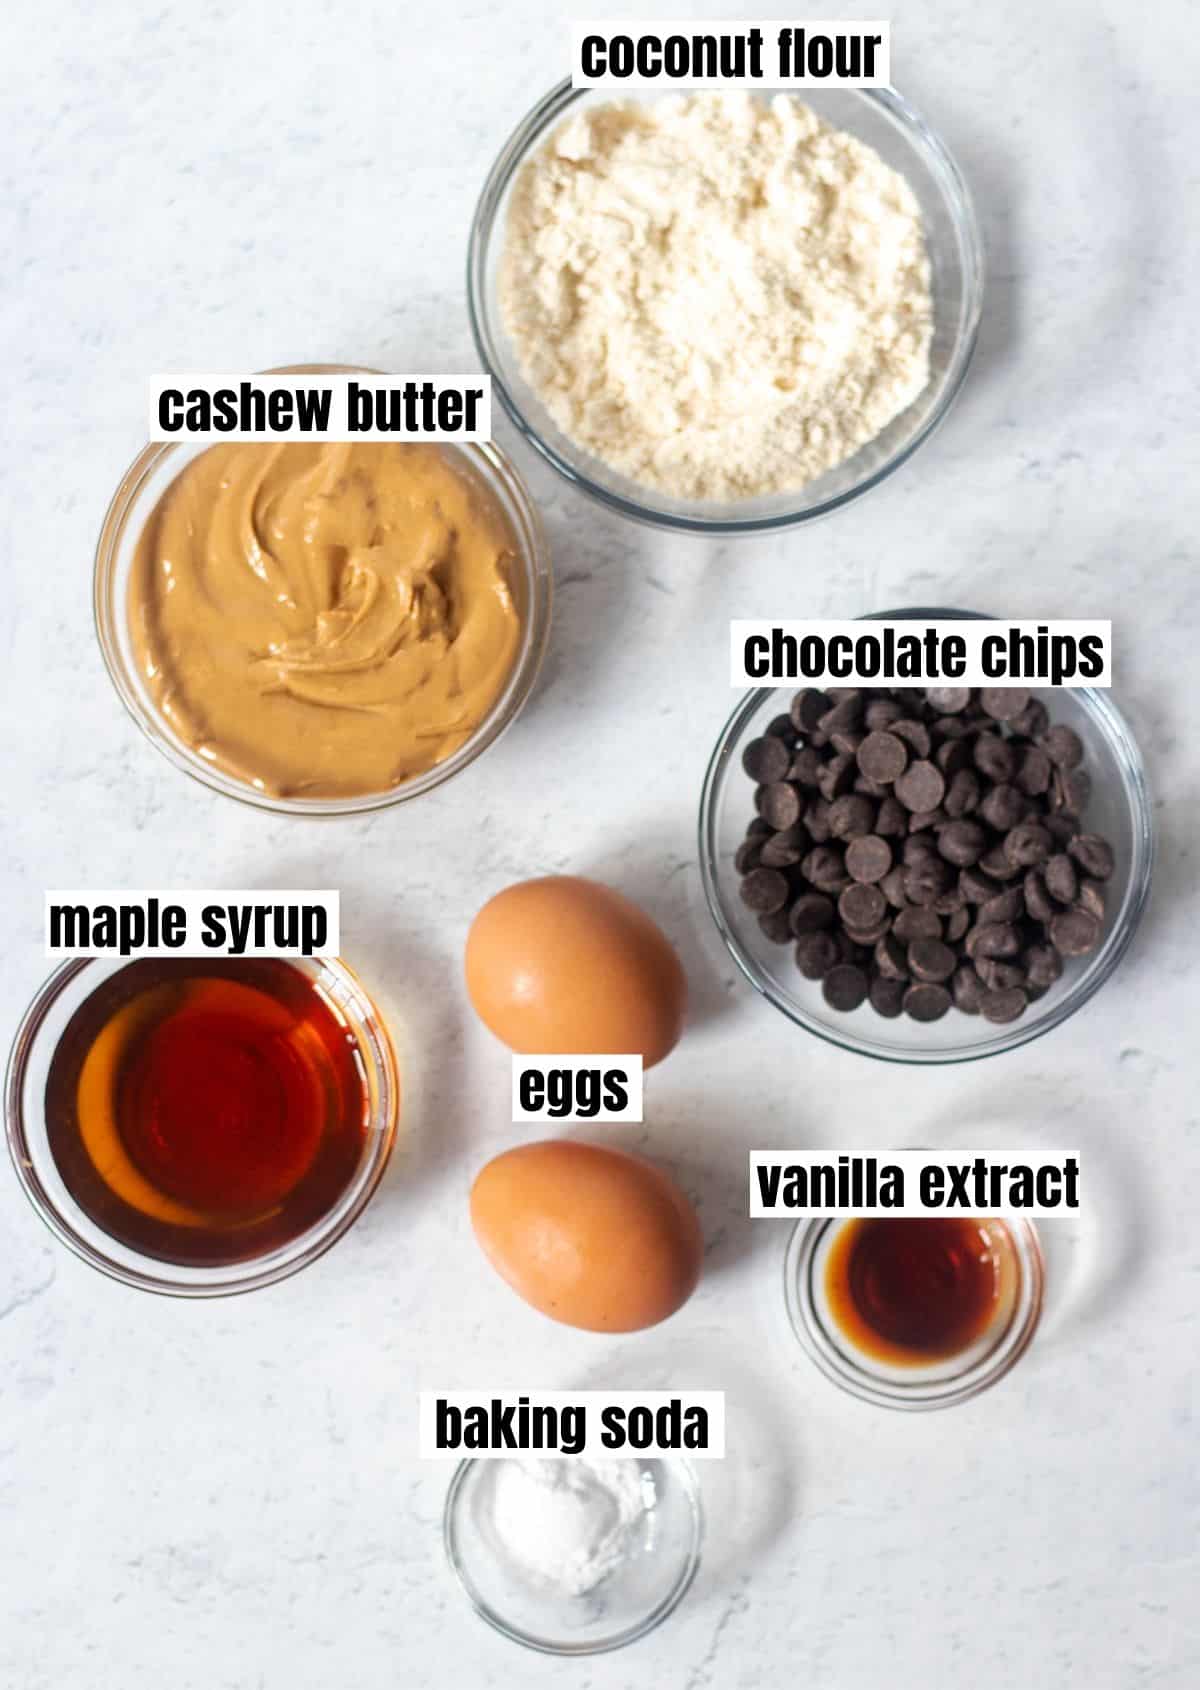 coconut flour, cashew butter, chocolate chips, maple syrup, eggs, vanilla extract, baking soda.